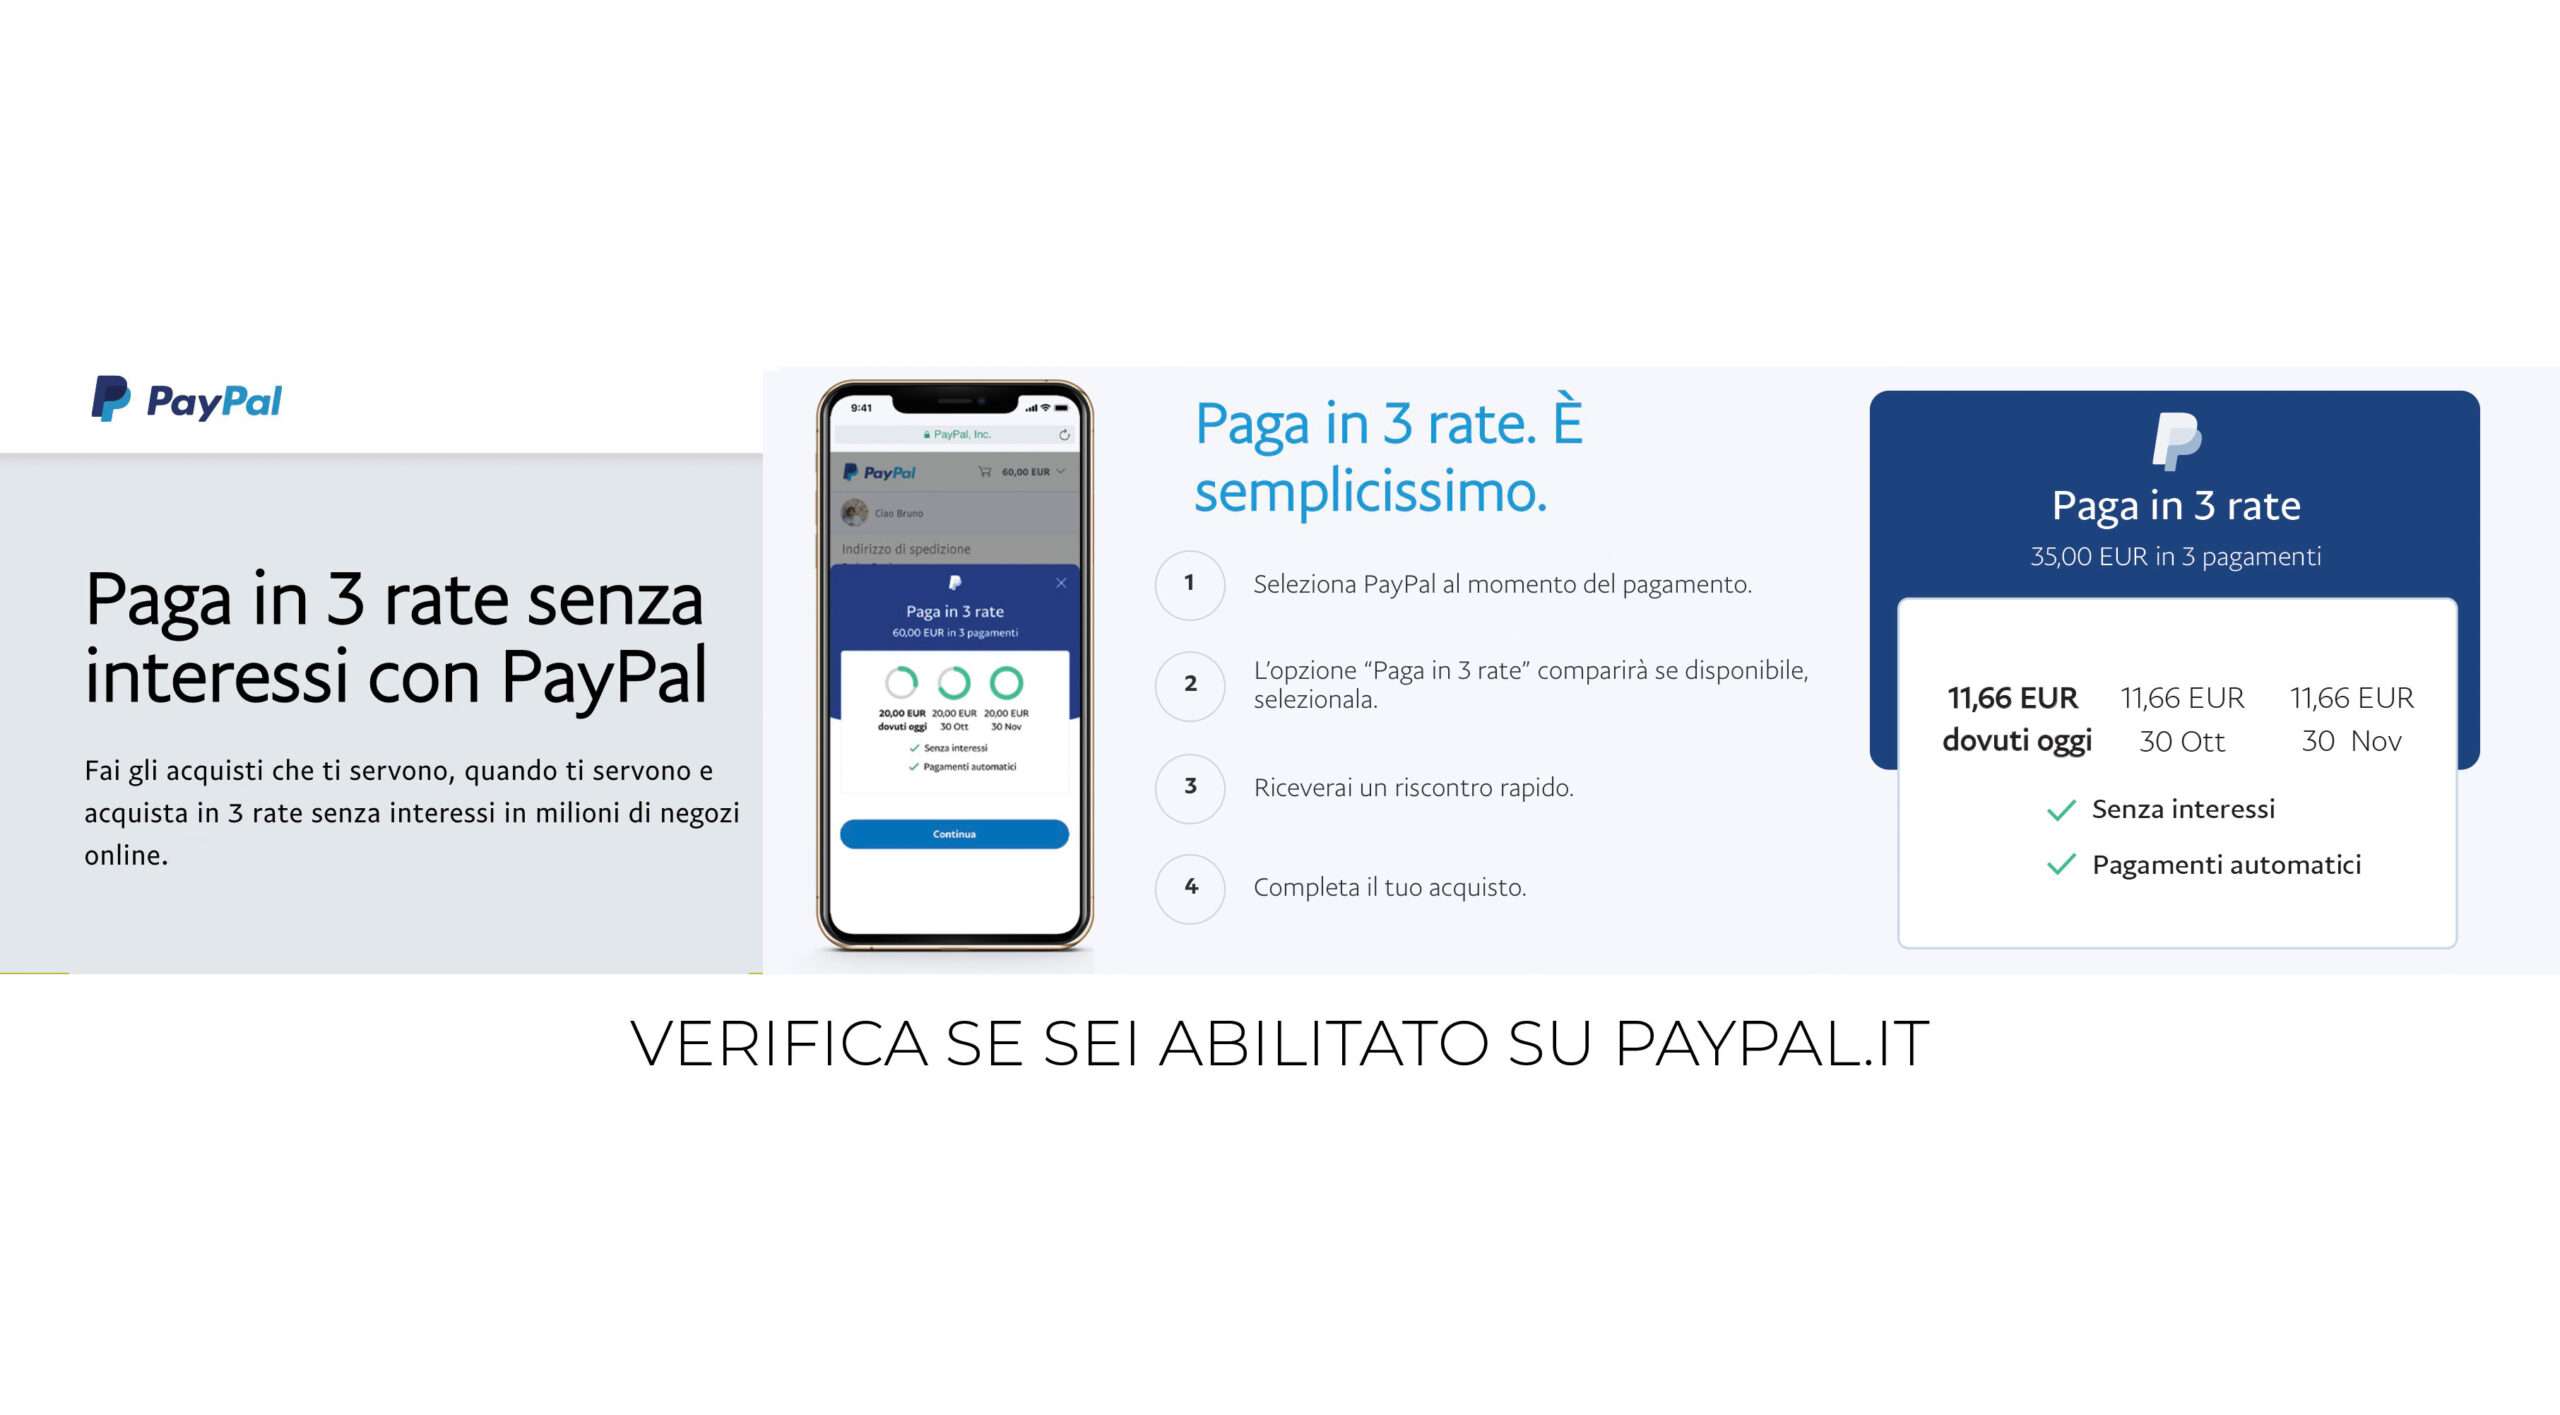 Paga in 3 rate con Paypal